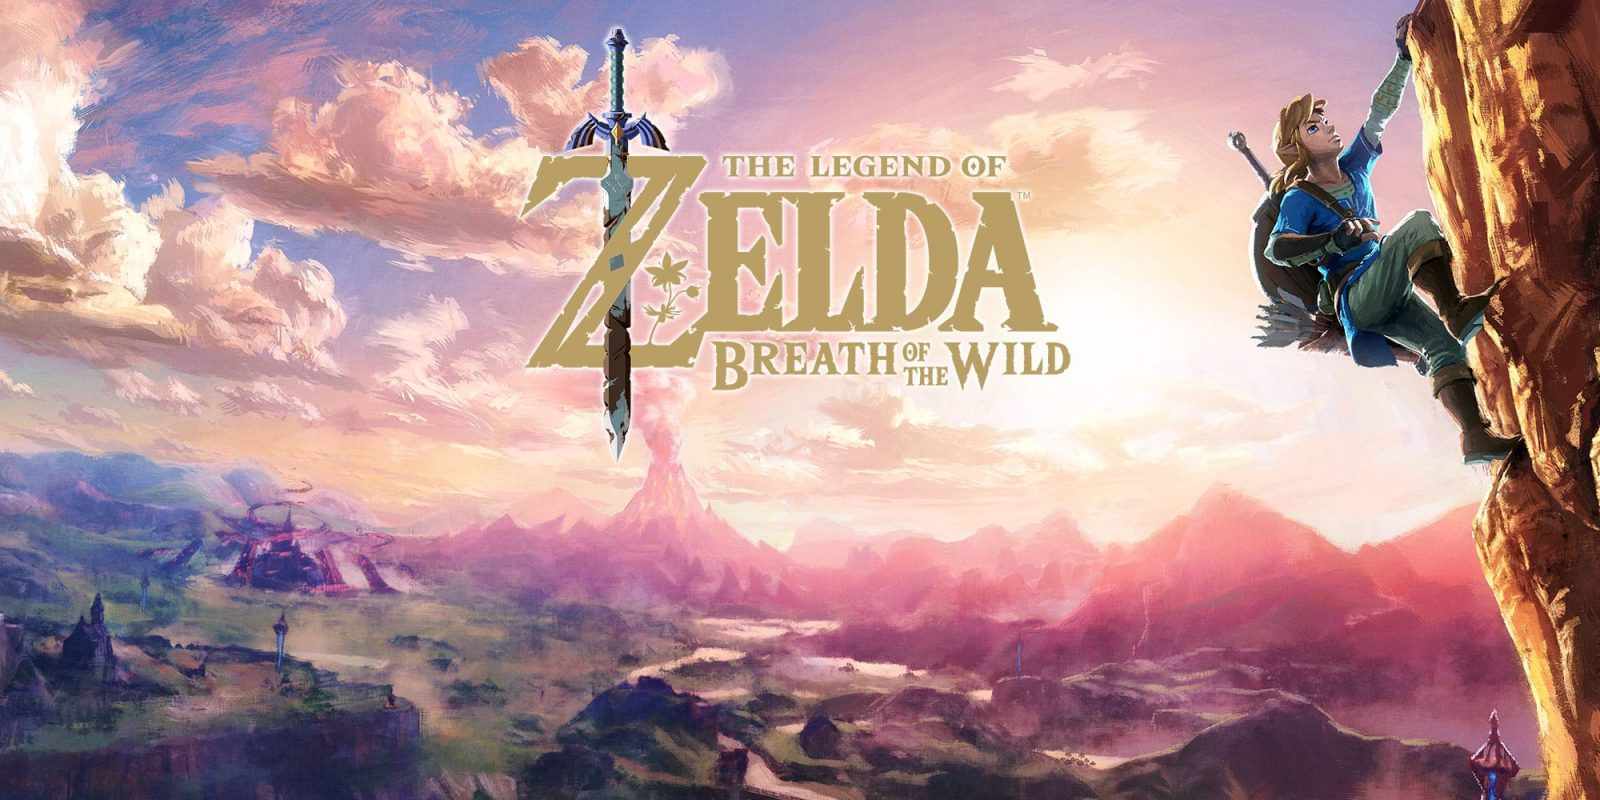 The Legend of Zelda Breath of the Wild variant colours